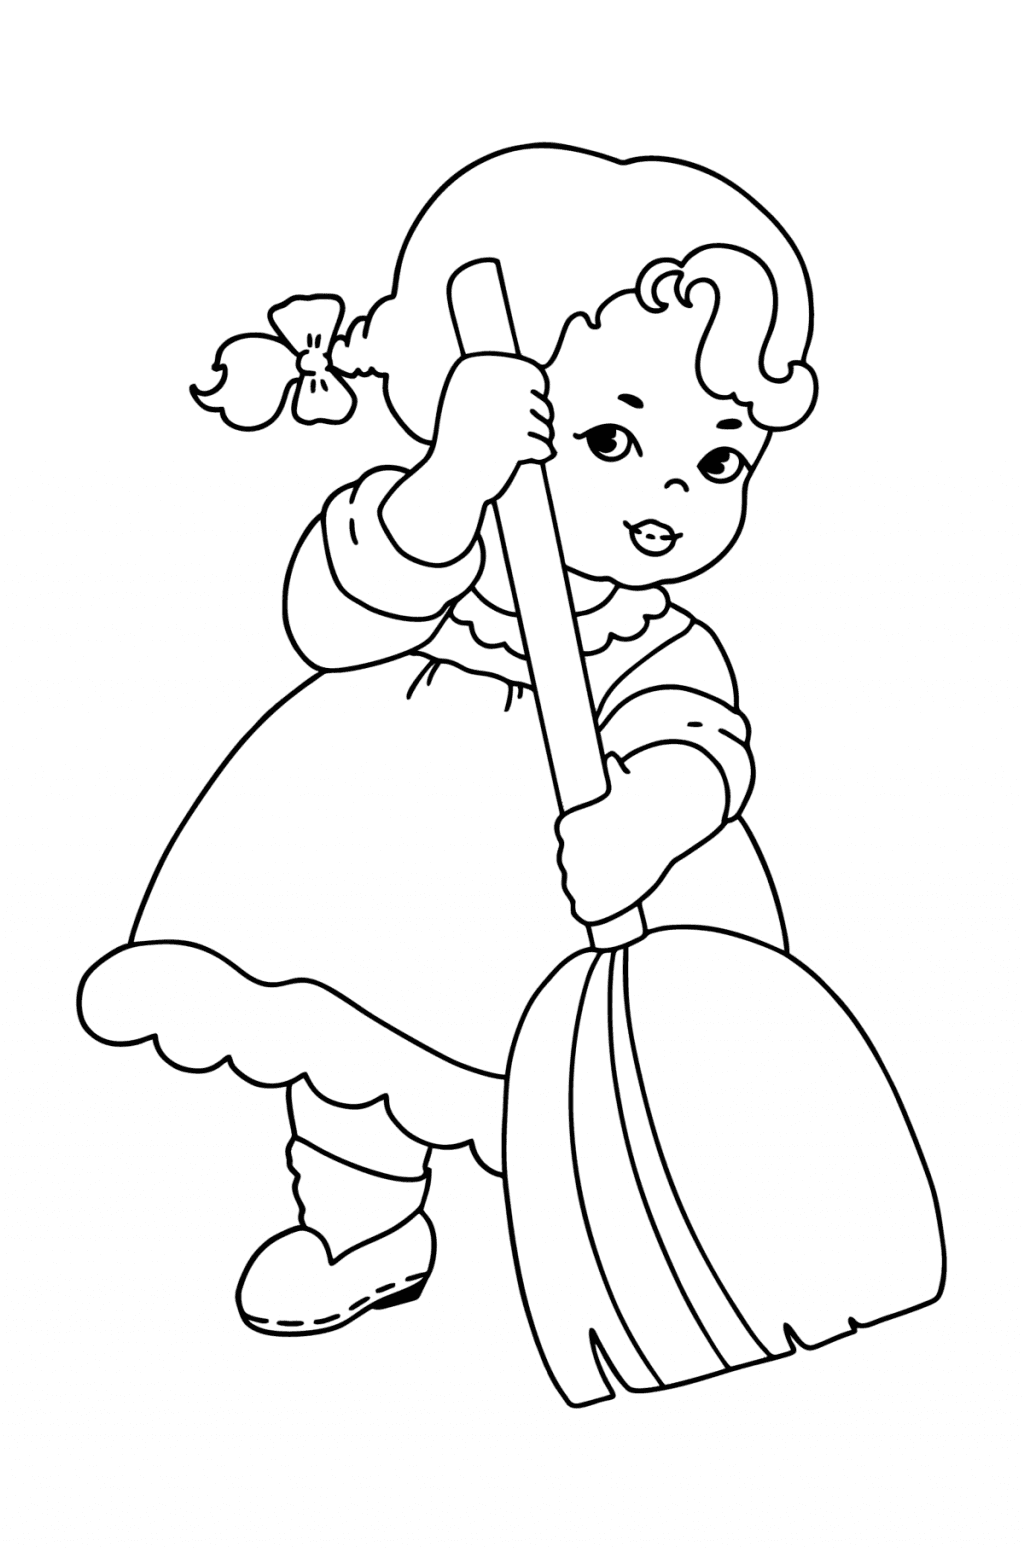 Kids Coloring pages - Download, Print, and Color Online!